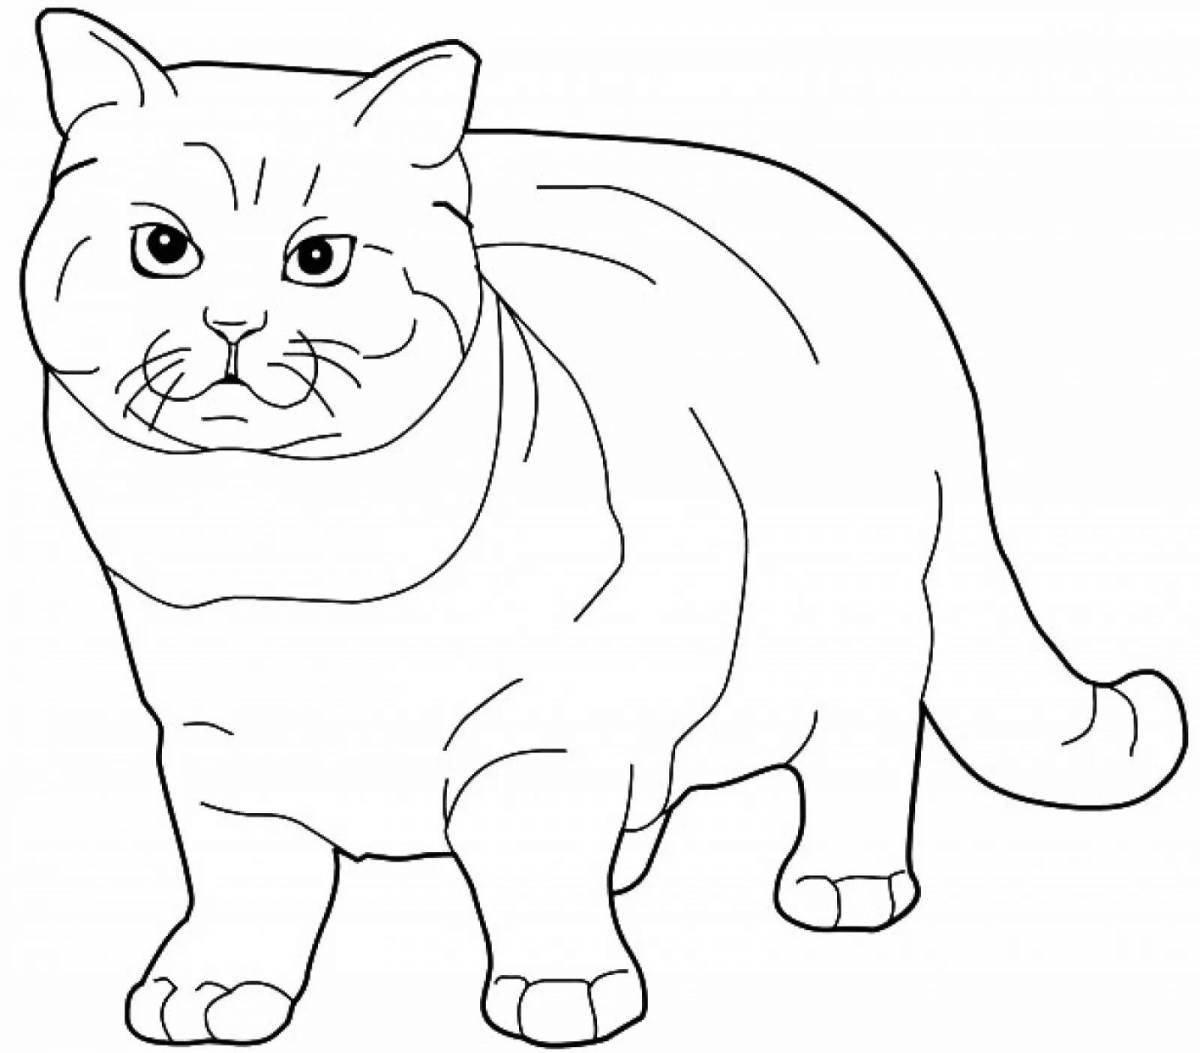 Coloring page graceful scottish cat